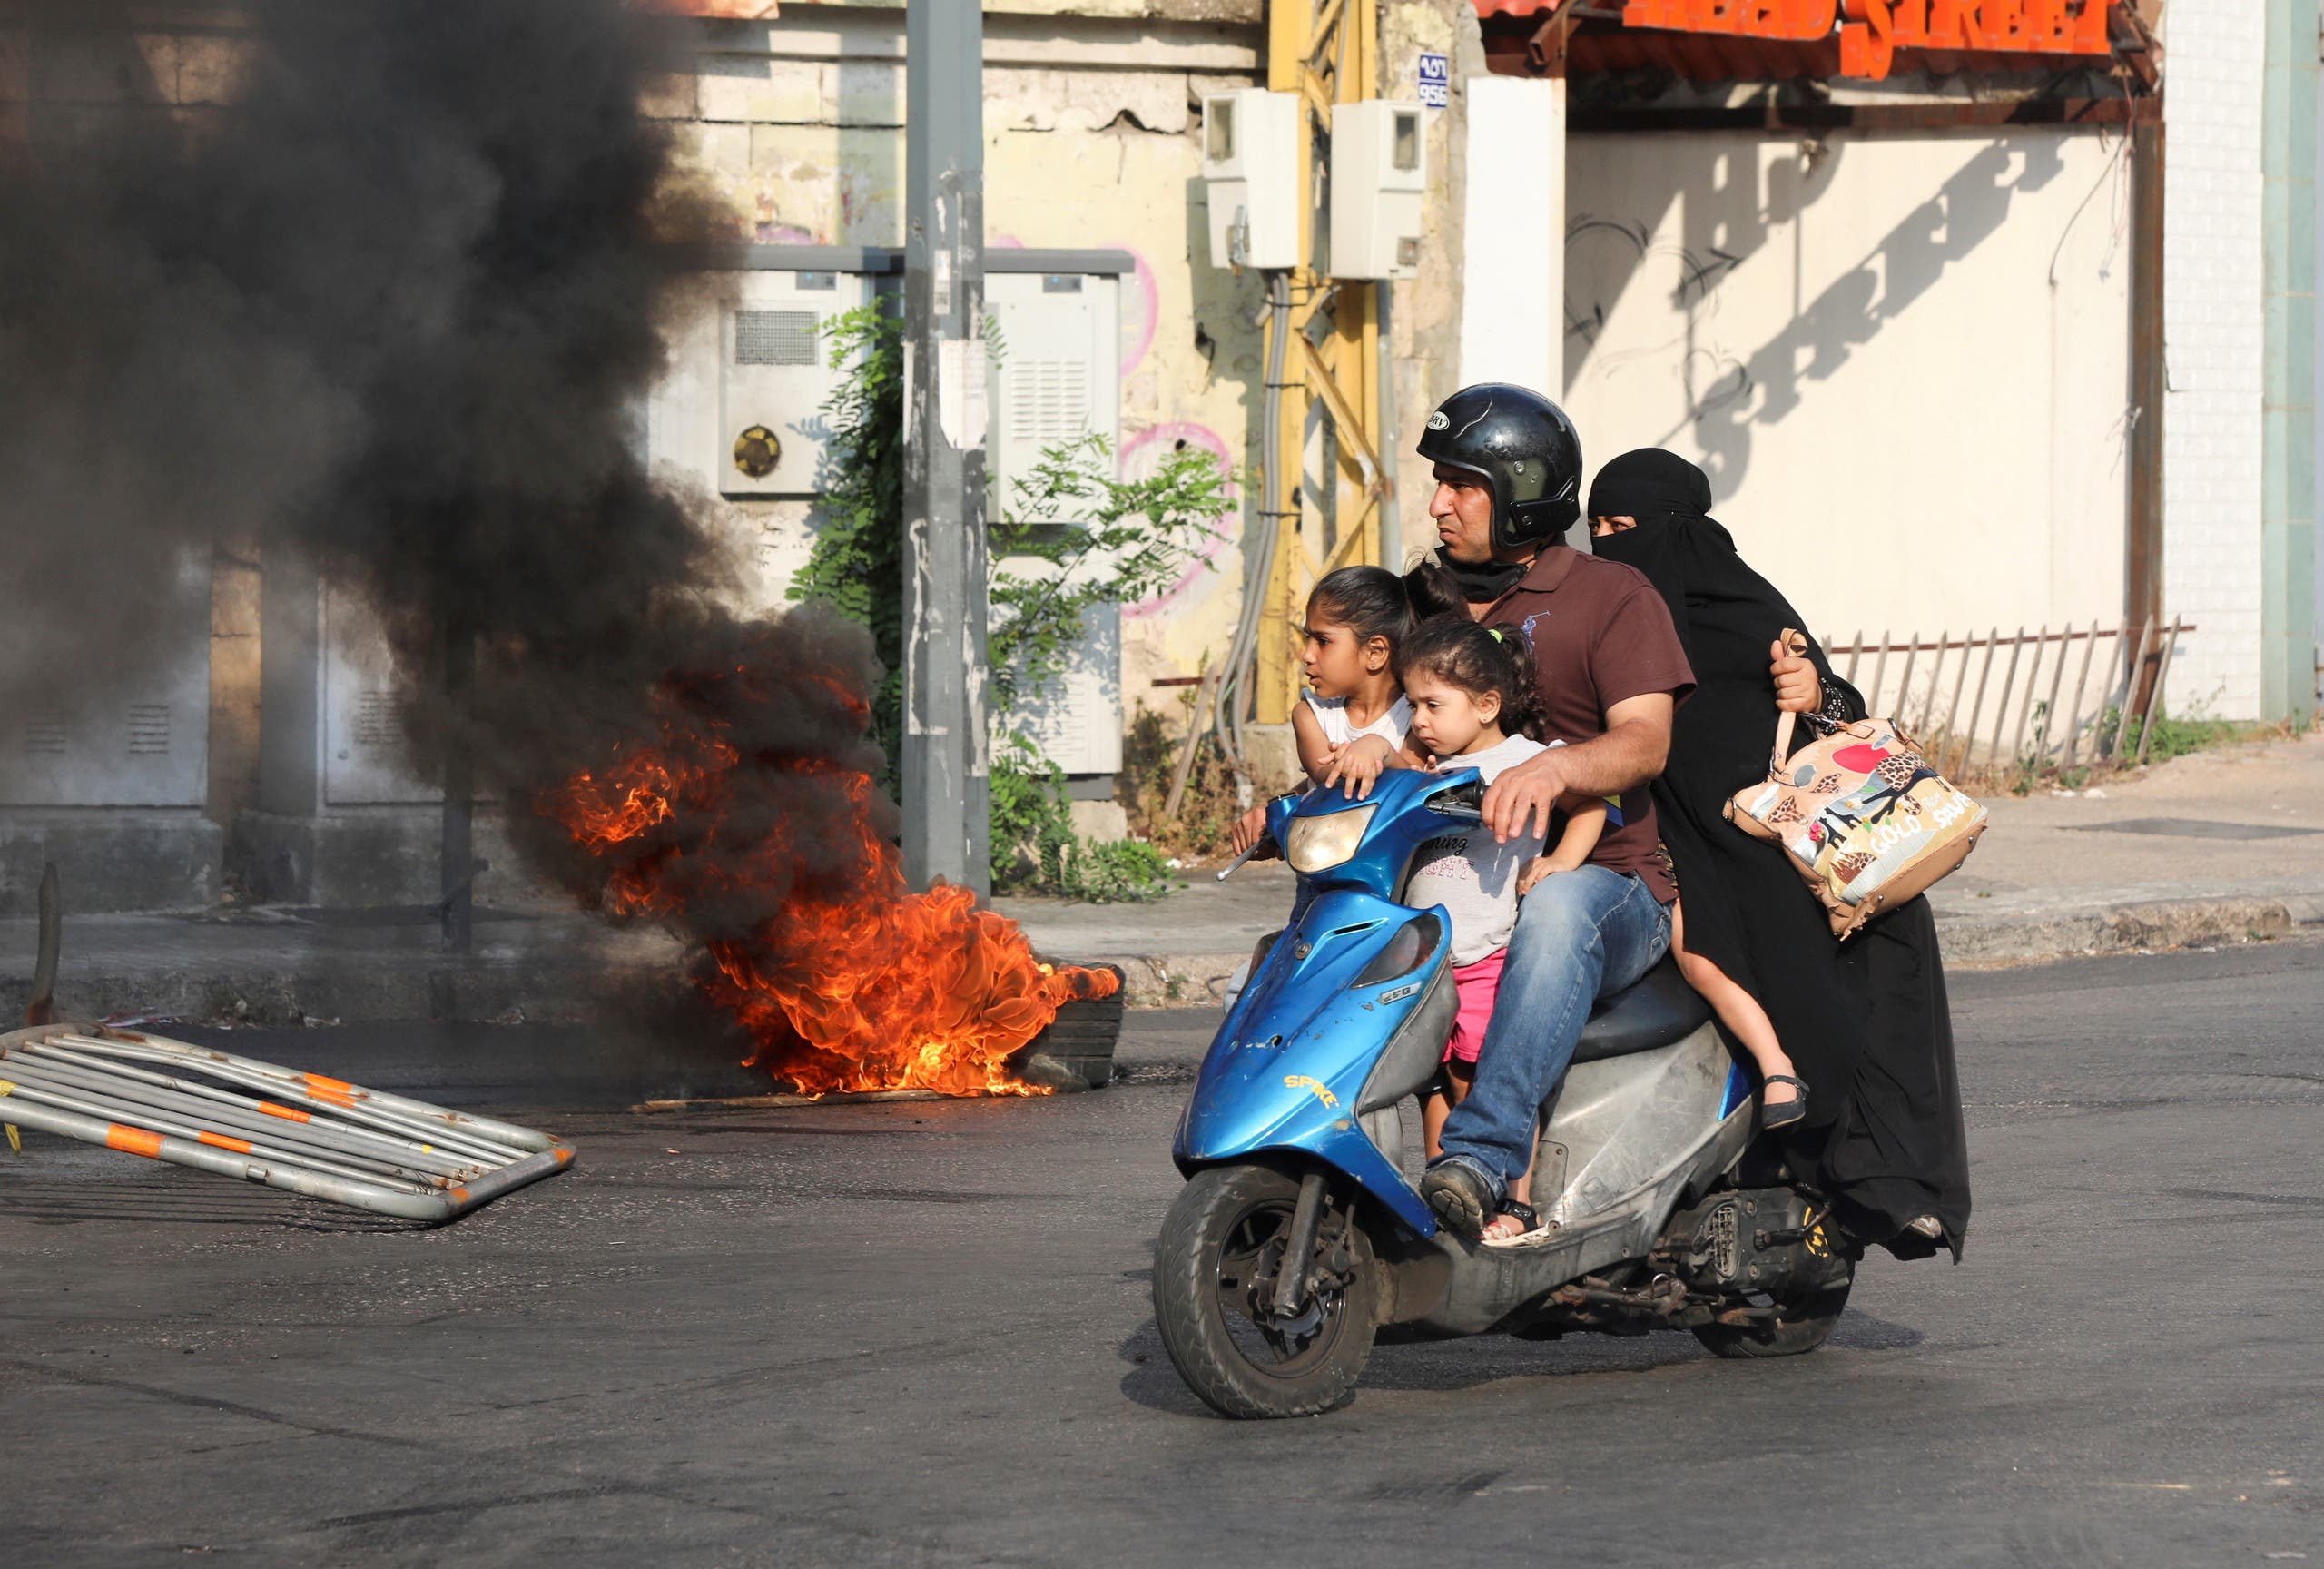 A man rides on a motorbike past a burning tyre, during a demonstration by relatives of some of the victims of last year's Beirut port blast, near the Justice Palace in Beirut, Lebanon July 14, 2021. (File photo: Reuters)